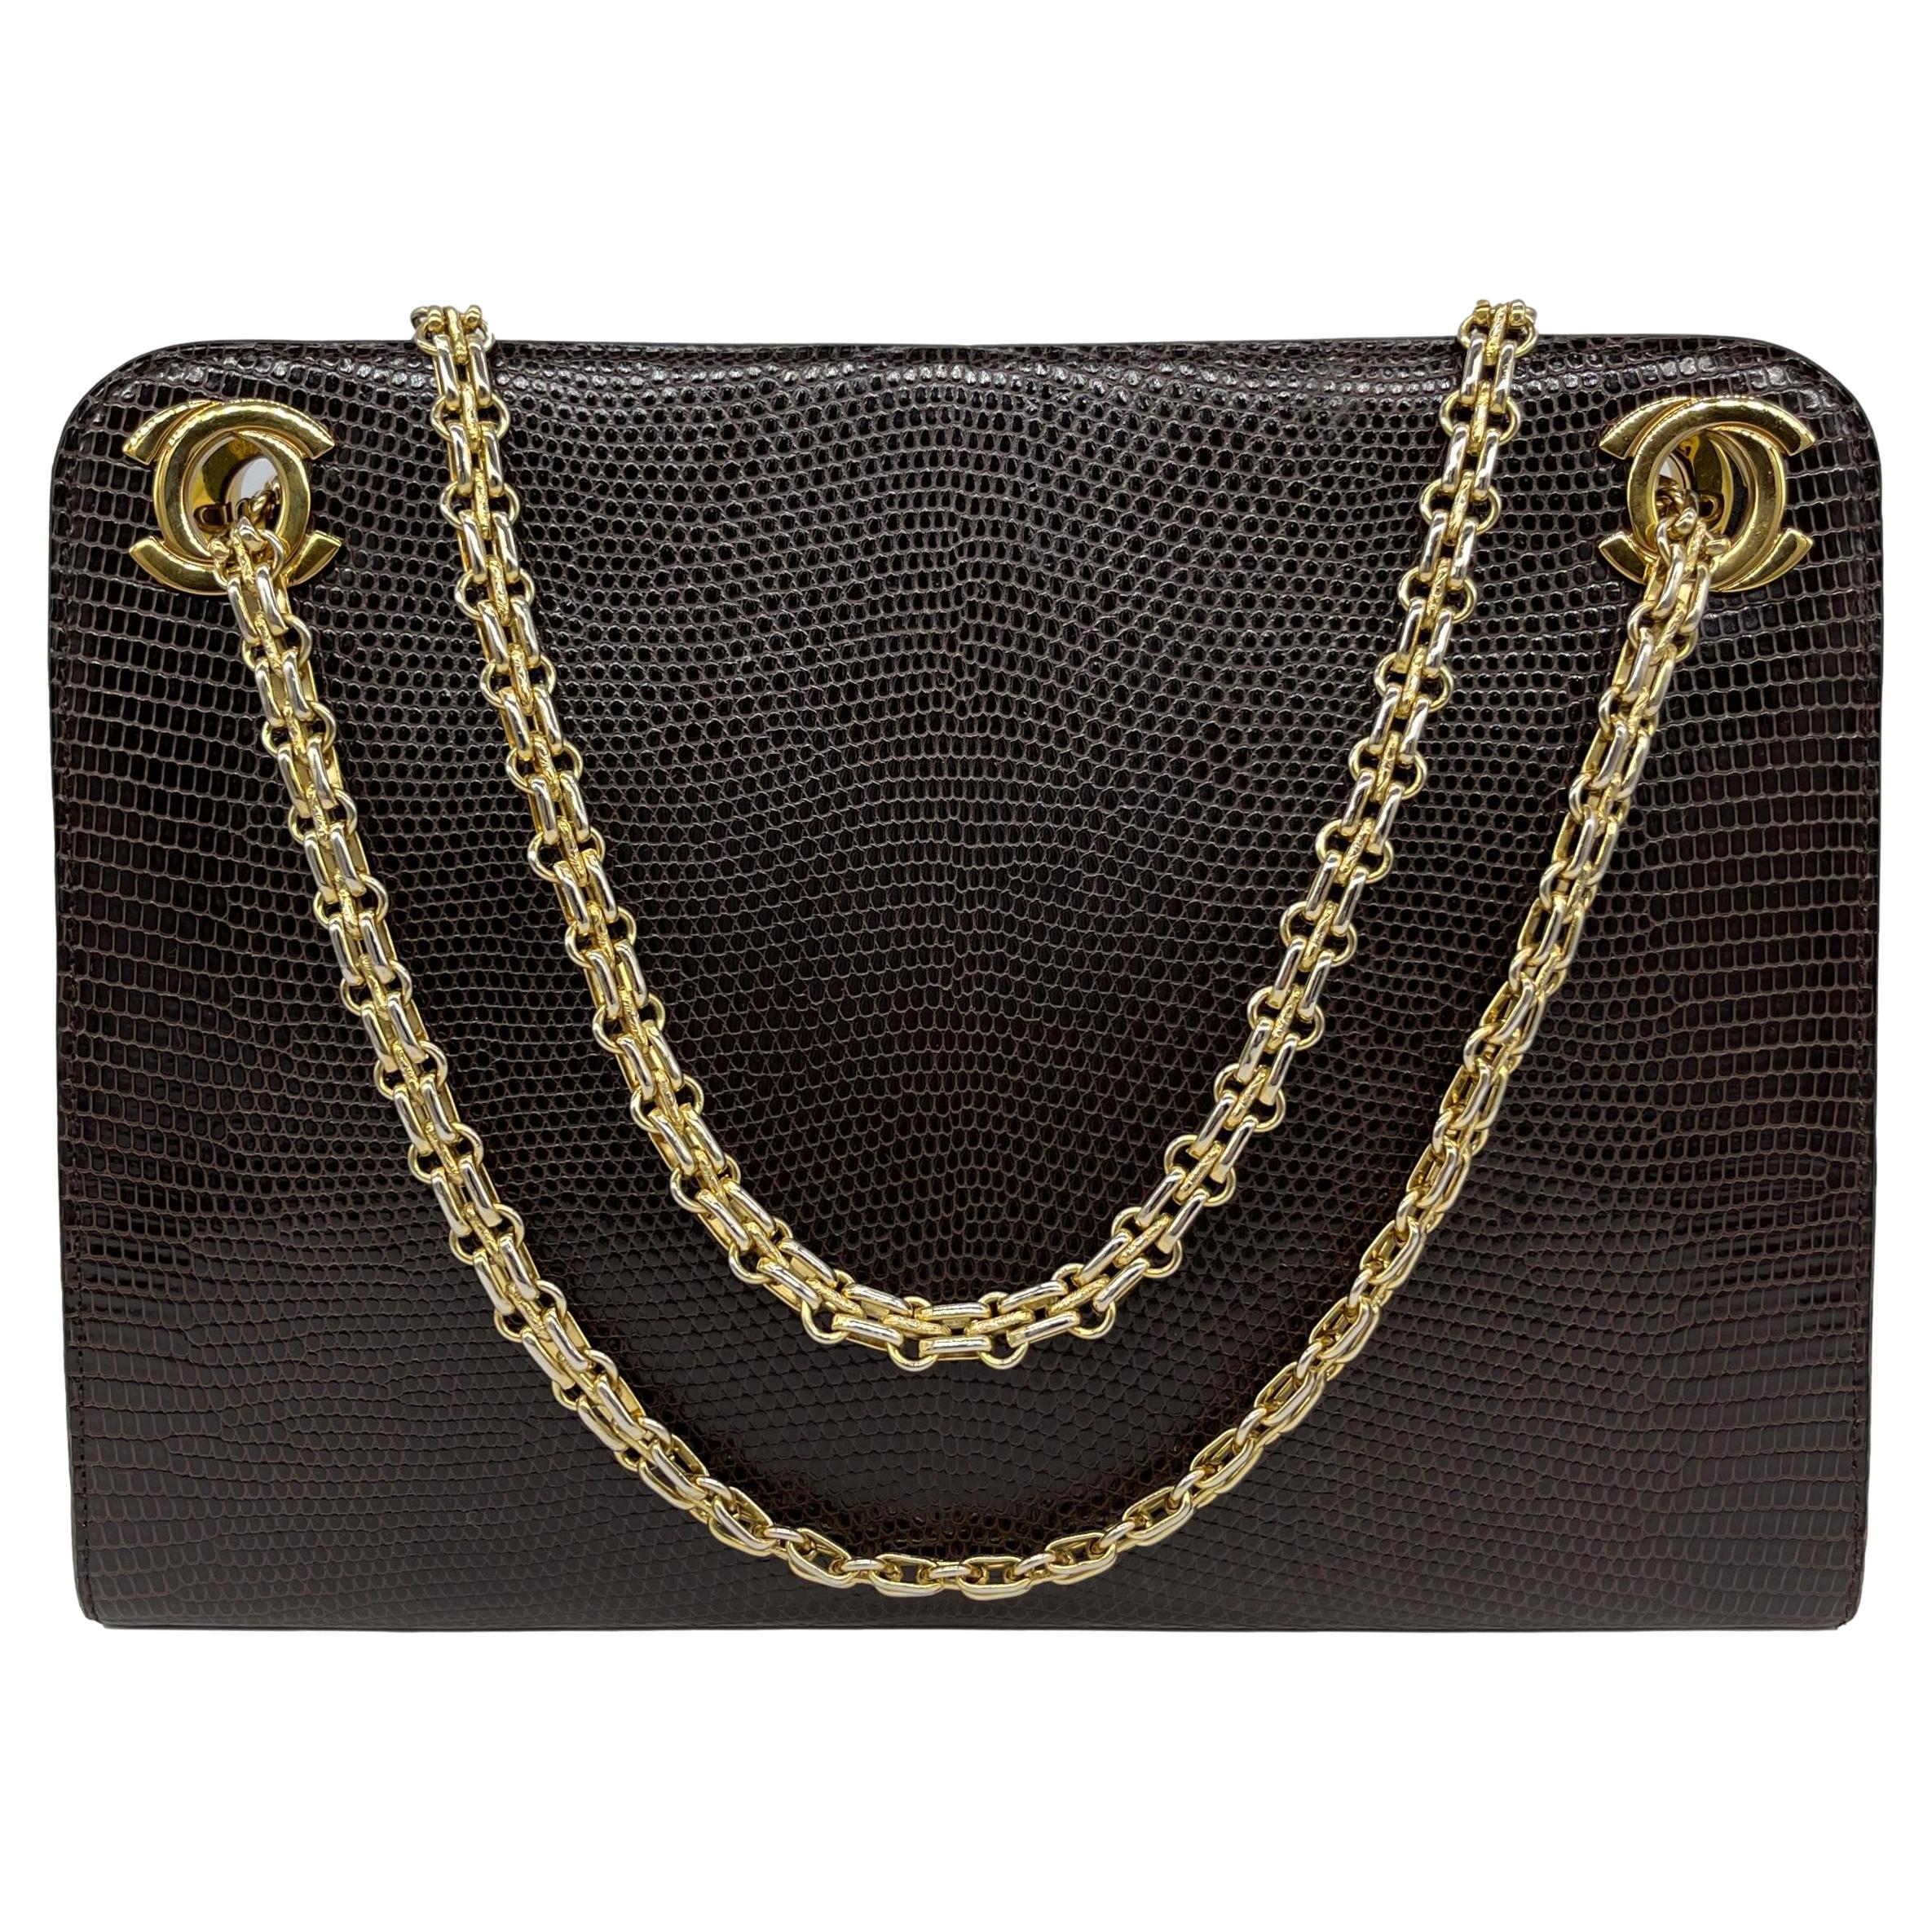 Chanel Vintage Lizard CC Bijoux Chain Shoulder Bag with Gold Hardware, 1980. Exceptional and rare, this highly sought after piece of Chanel history was produced before Chanel incorporated serial codes into their products, dating this bag to around